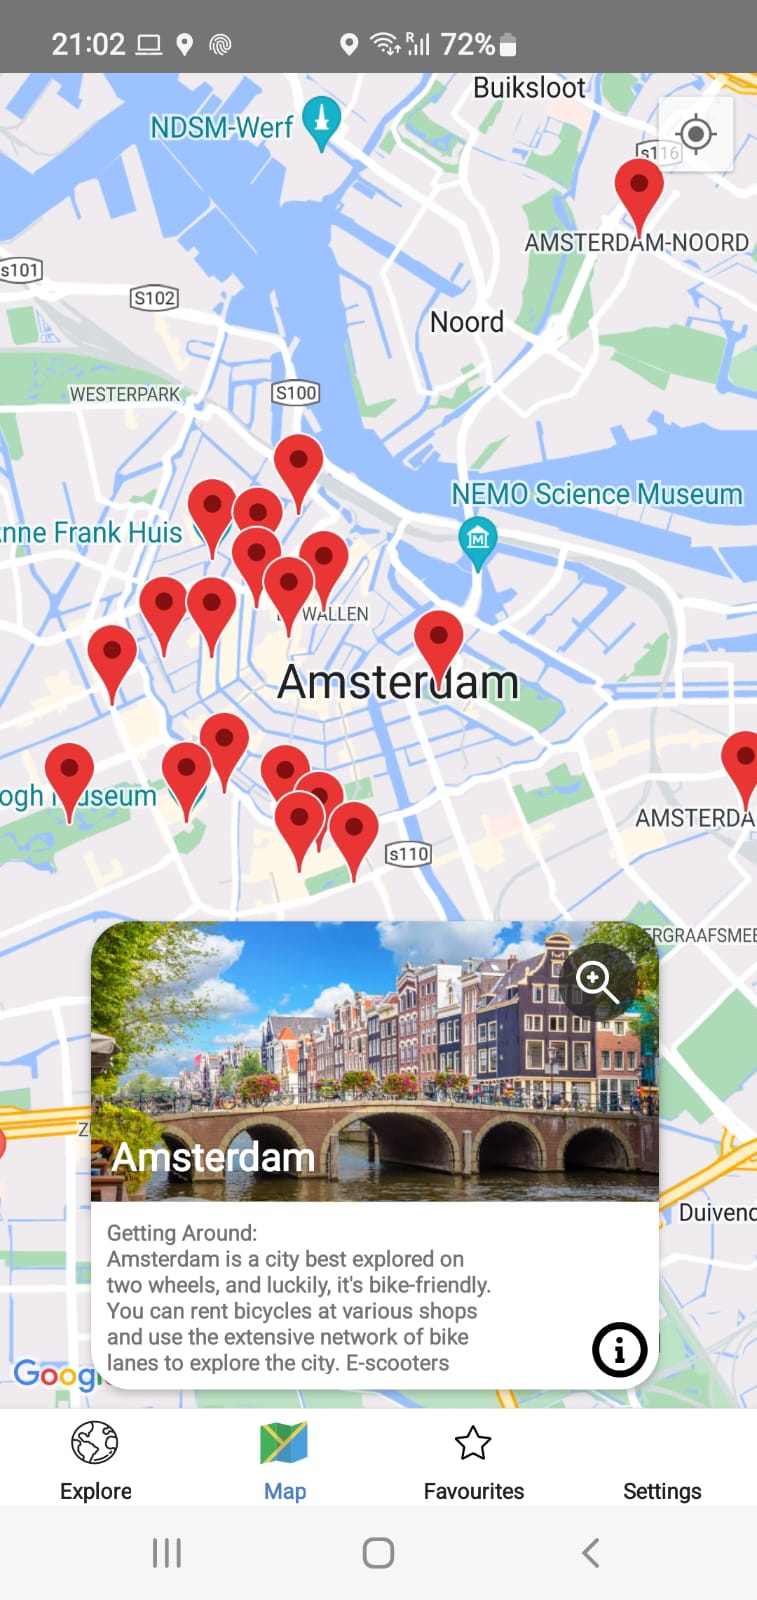 Amsterdam guide eothere.com